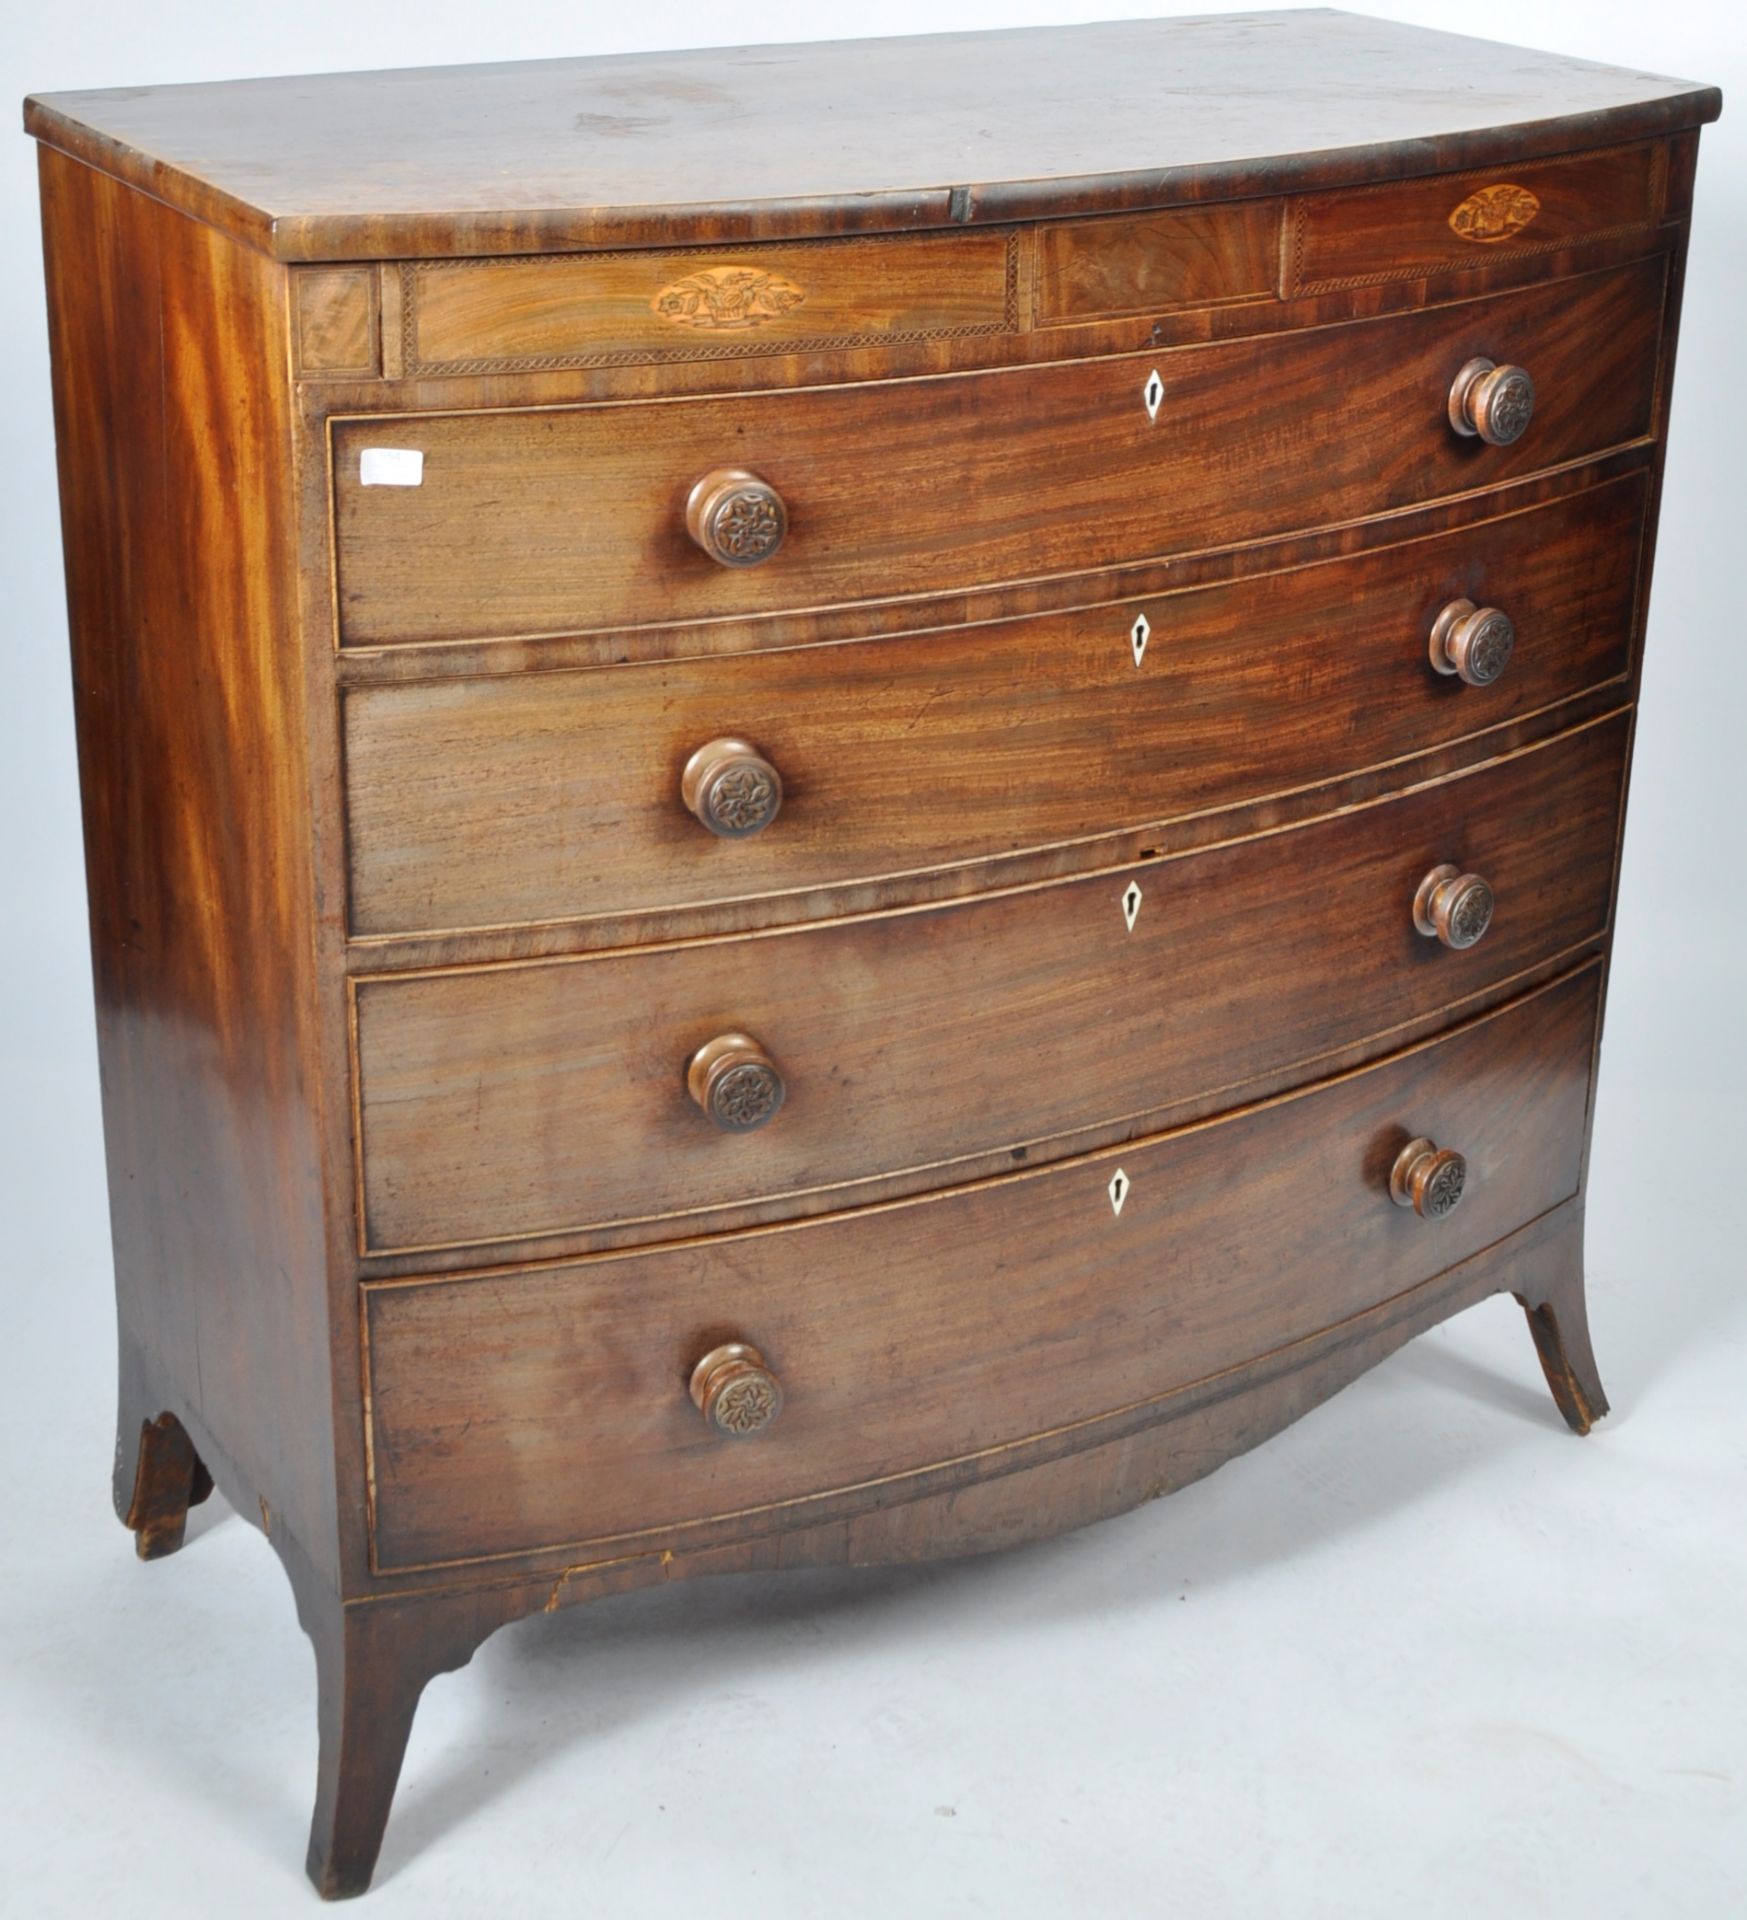 ANTIQUE 19TH CENTURY MAHOGANY BOW FRONT CHEST OF DRAWERS - Image 3 of 10